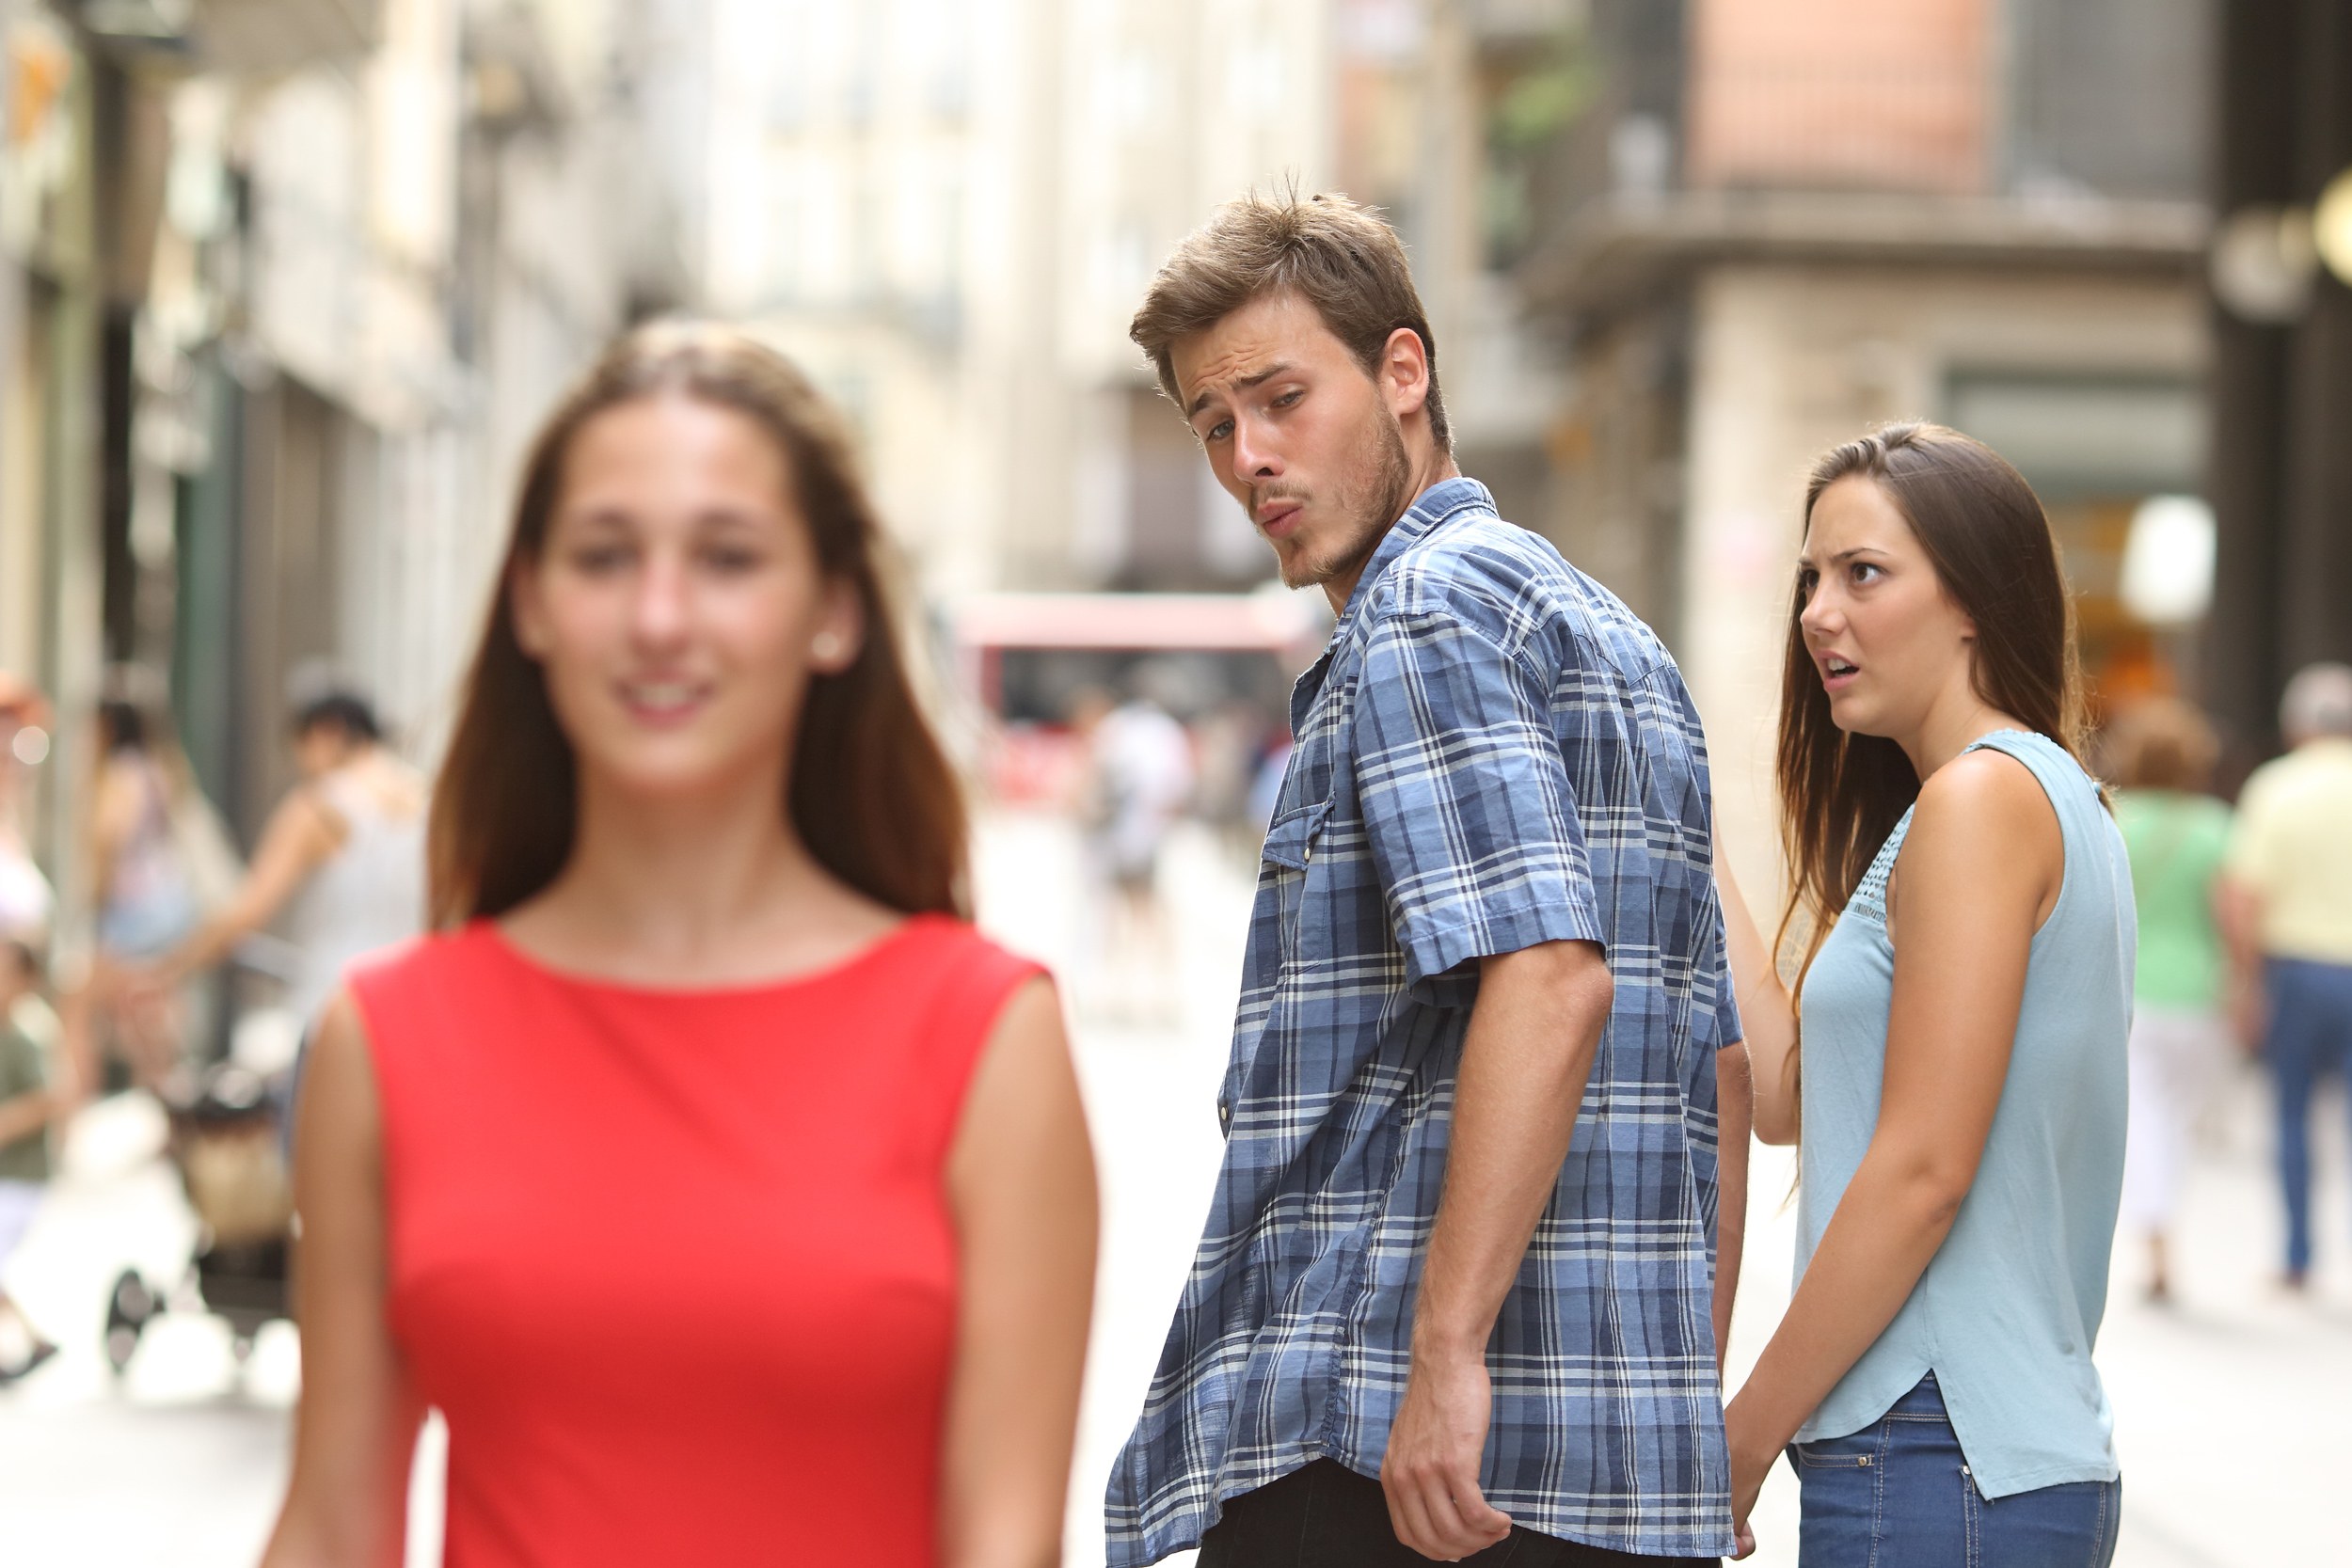 Did Charlie Chaplin Invent The Distracted Boyfriend Meme?